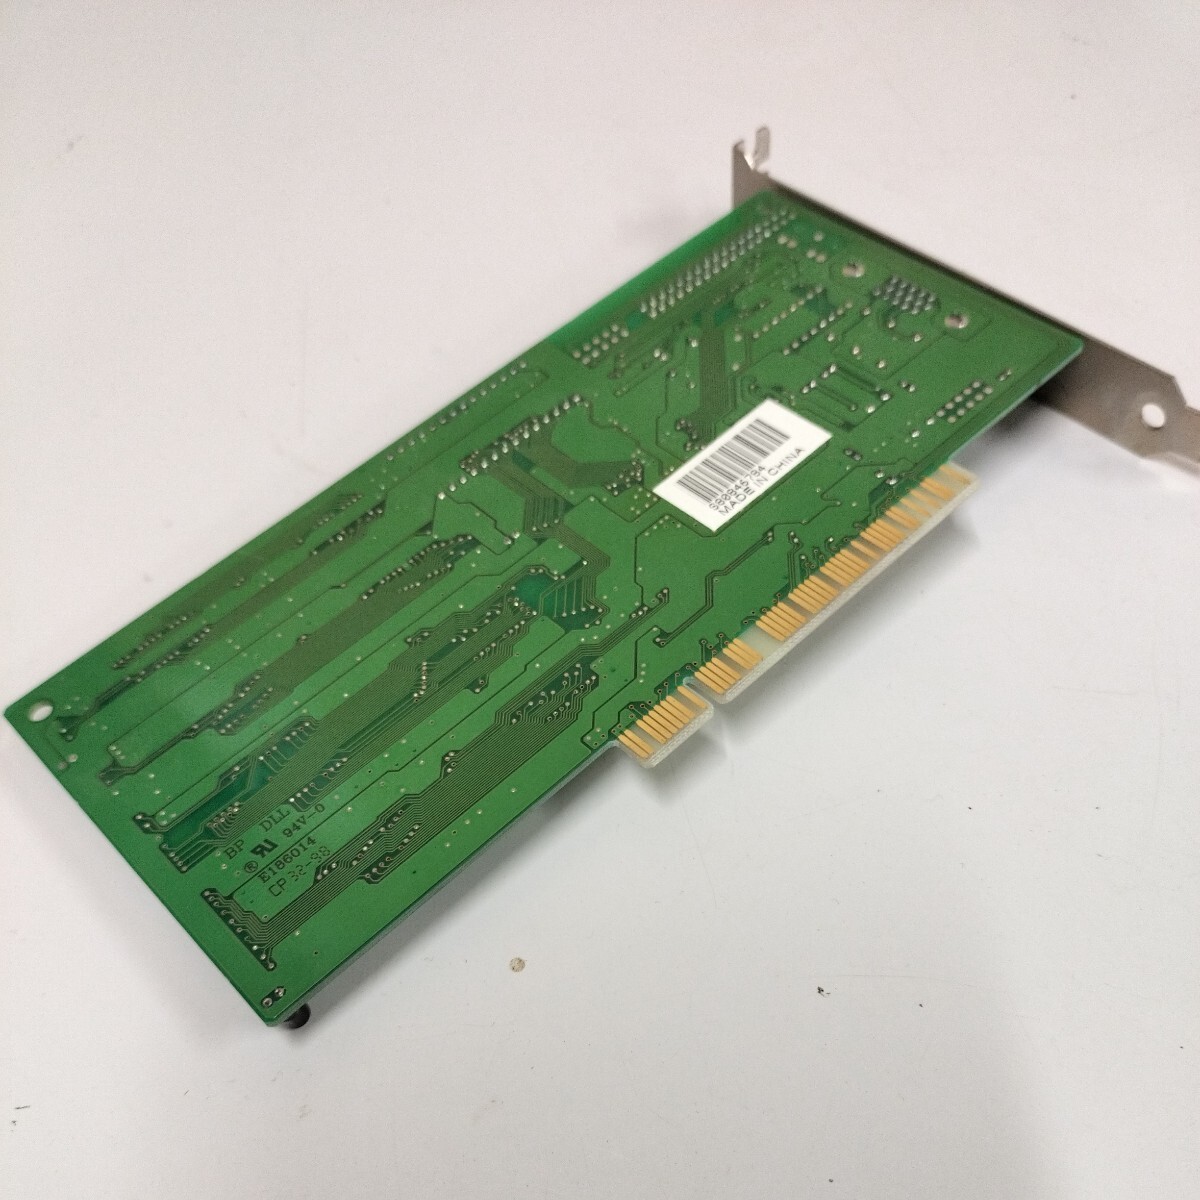  S3 Virge DX 4Mb - Sparkle SP-325A VGA PCI Graphics Video Card グラフィックカード 中古品 ジャンク品の画像6